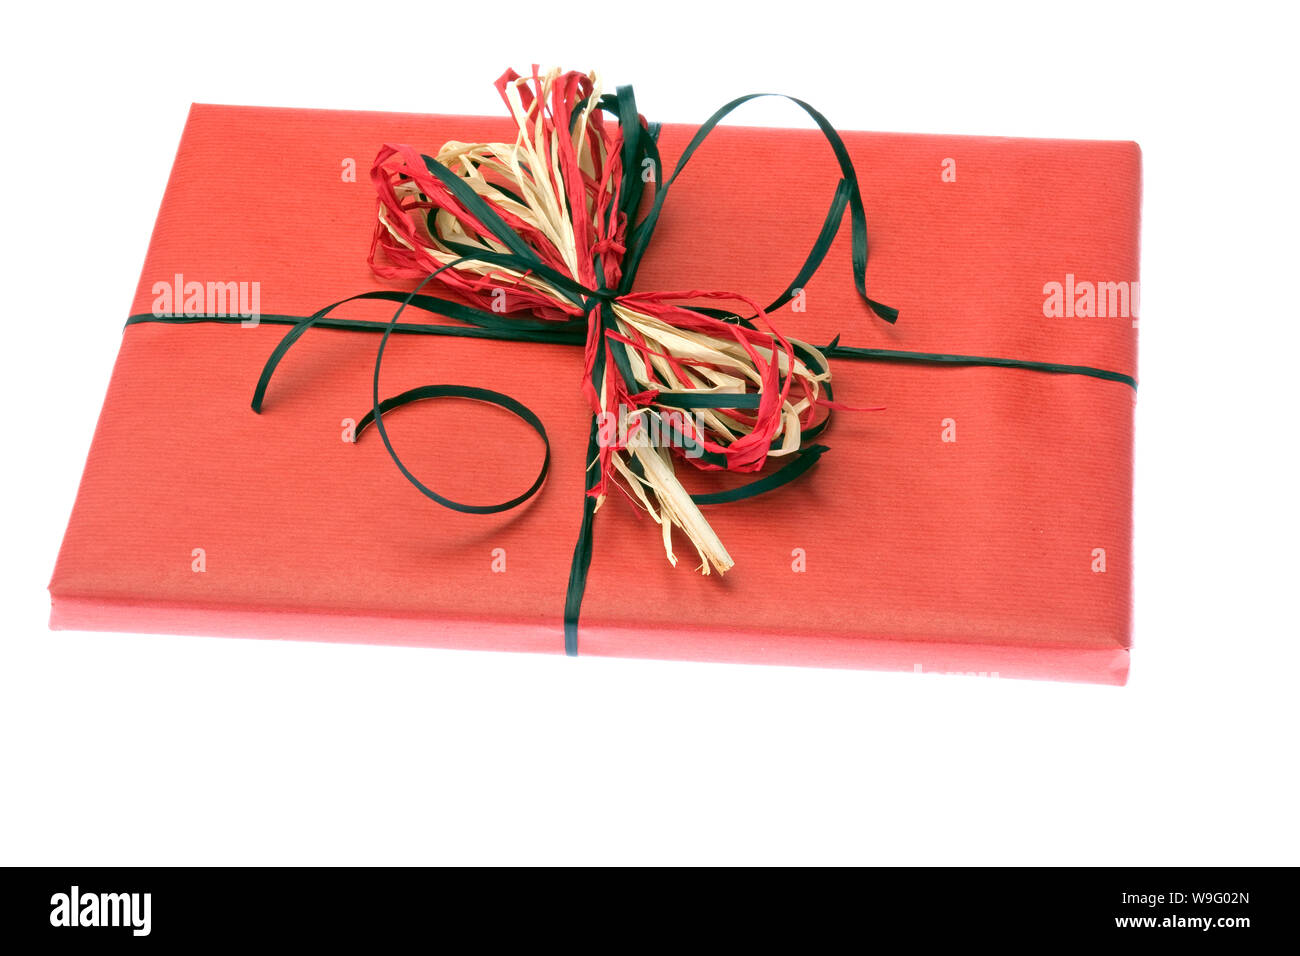 Brown Gift Tag With Red Raffia Ribbon Stock Photo - Download Image